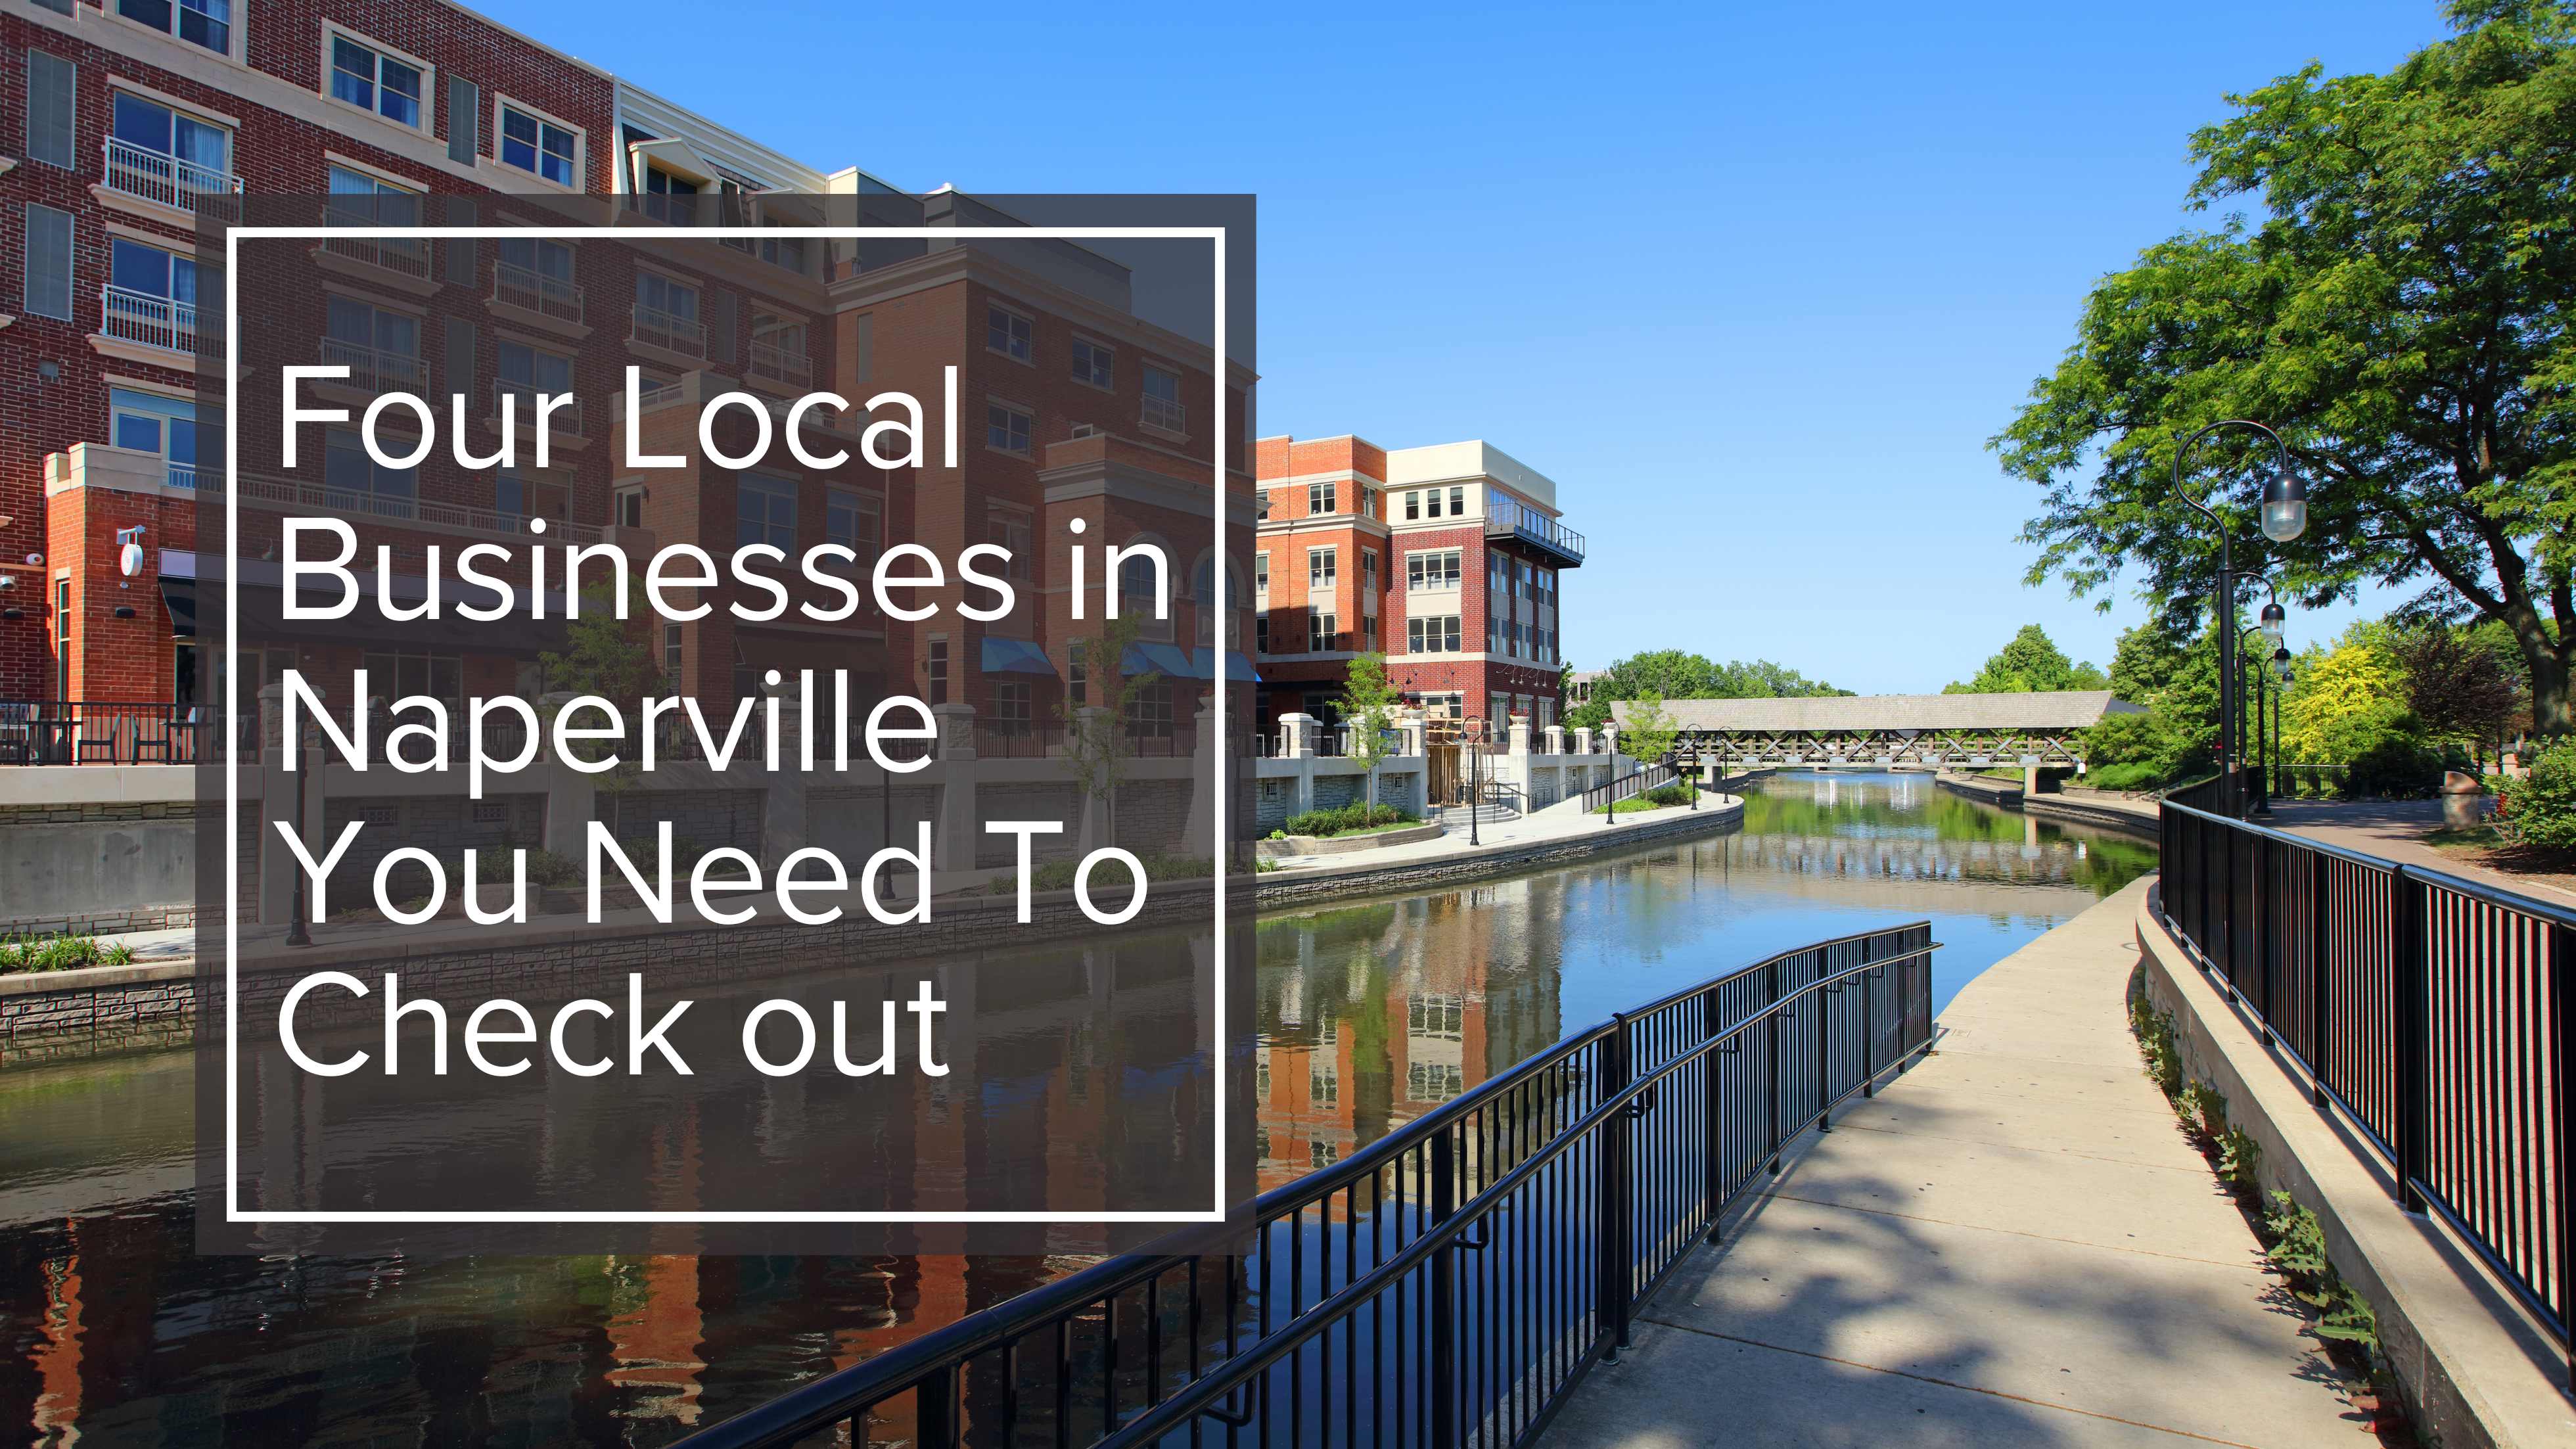 Four Local Businesses in Naperville You Need to Check Out